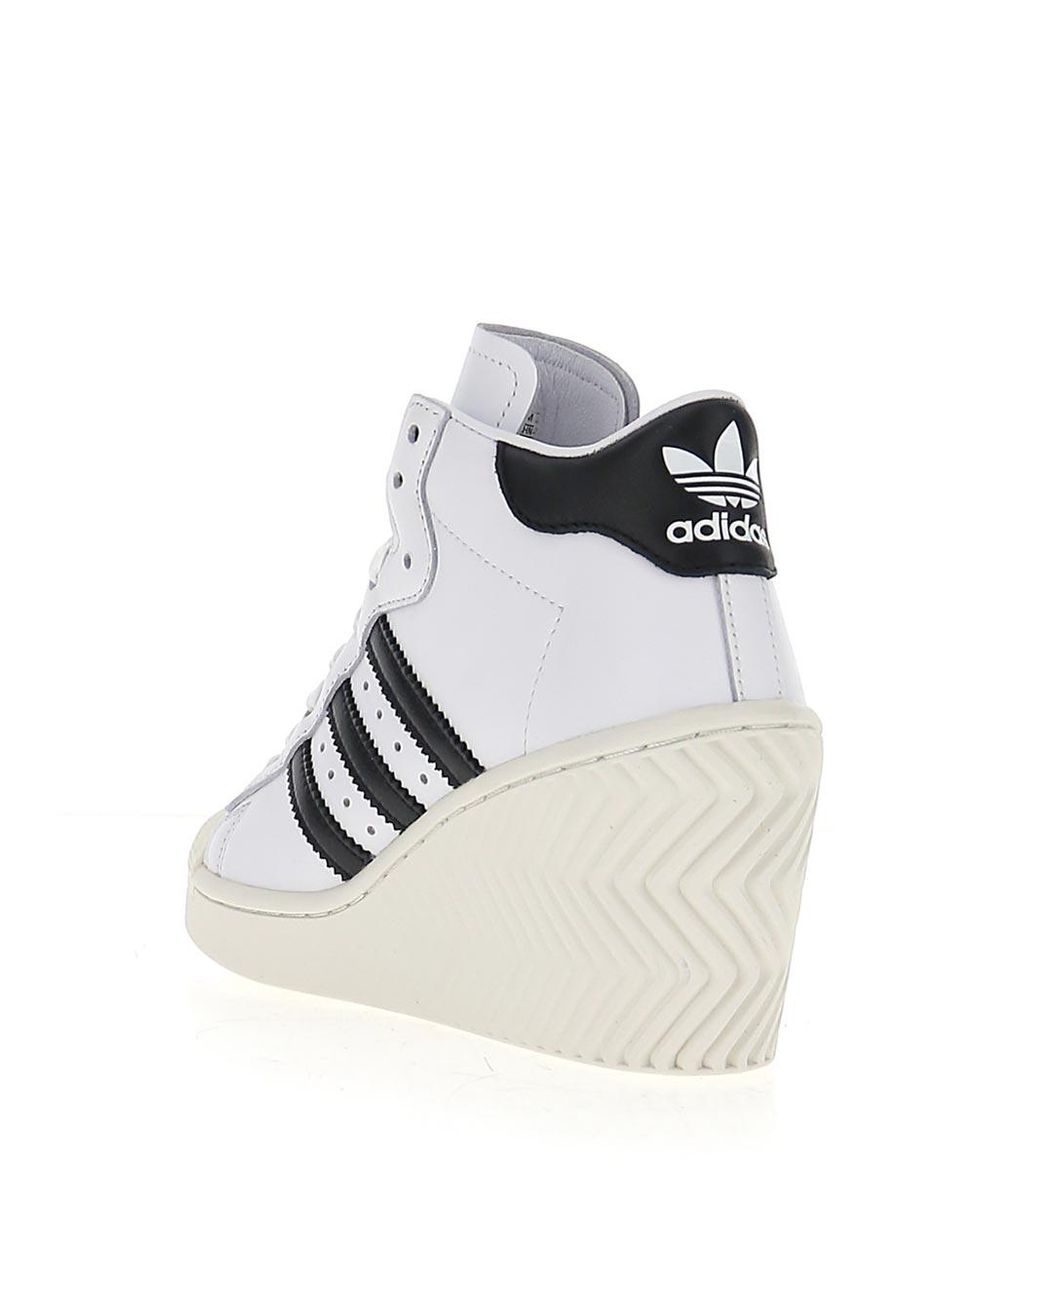 adidas Originals Leather Superstar Ellure Wedged Sneakers in White | Lyst